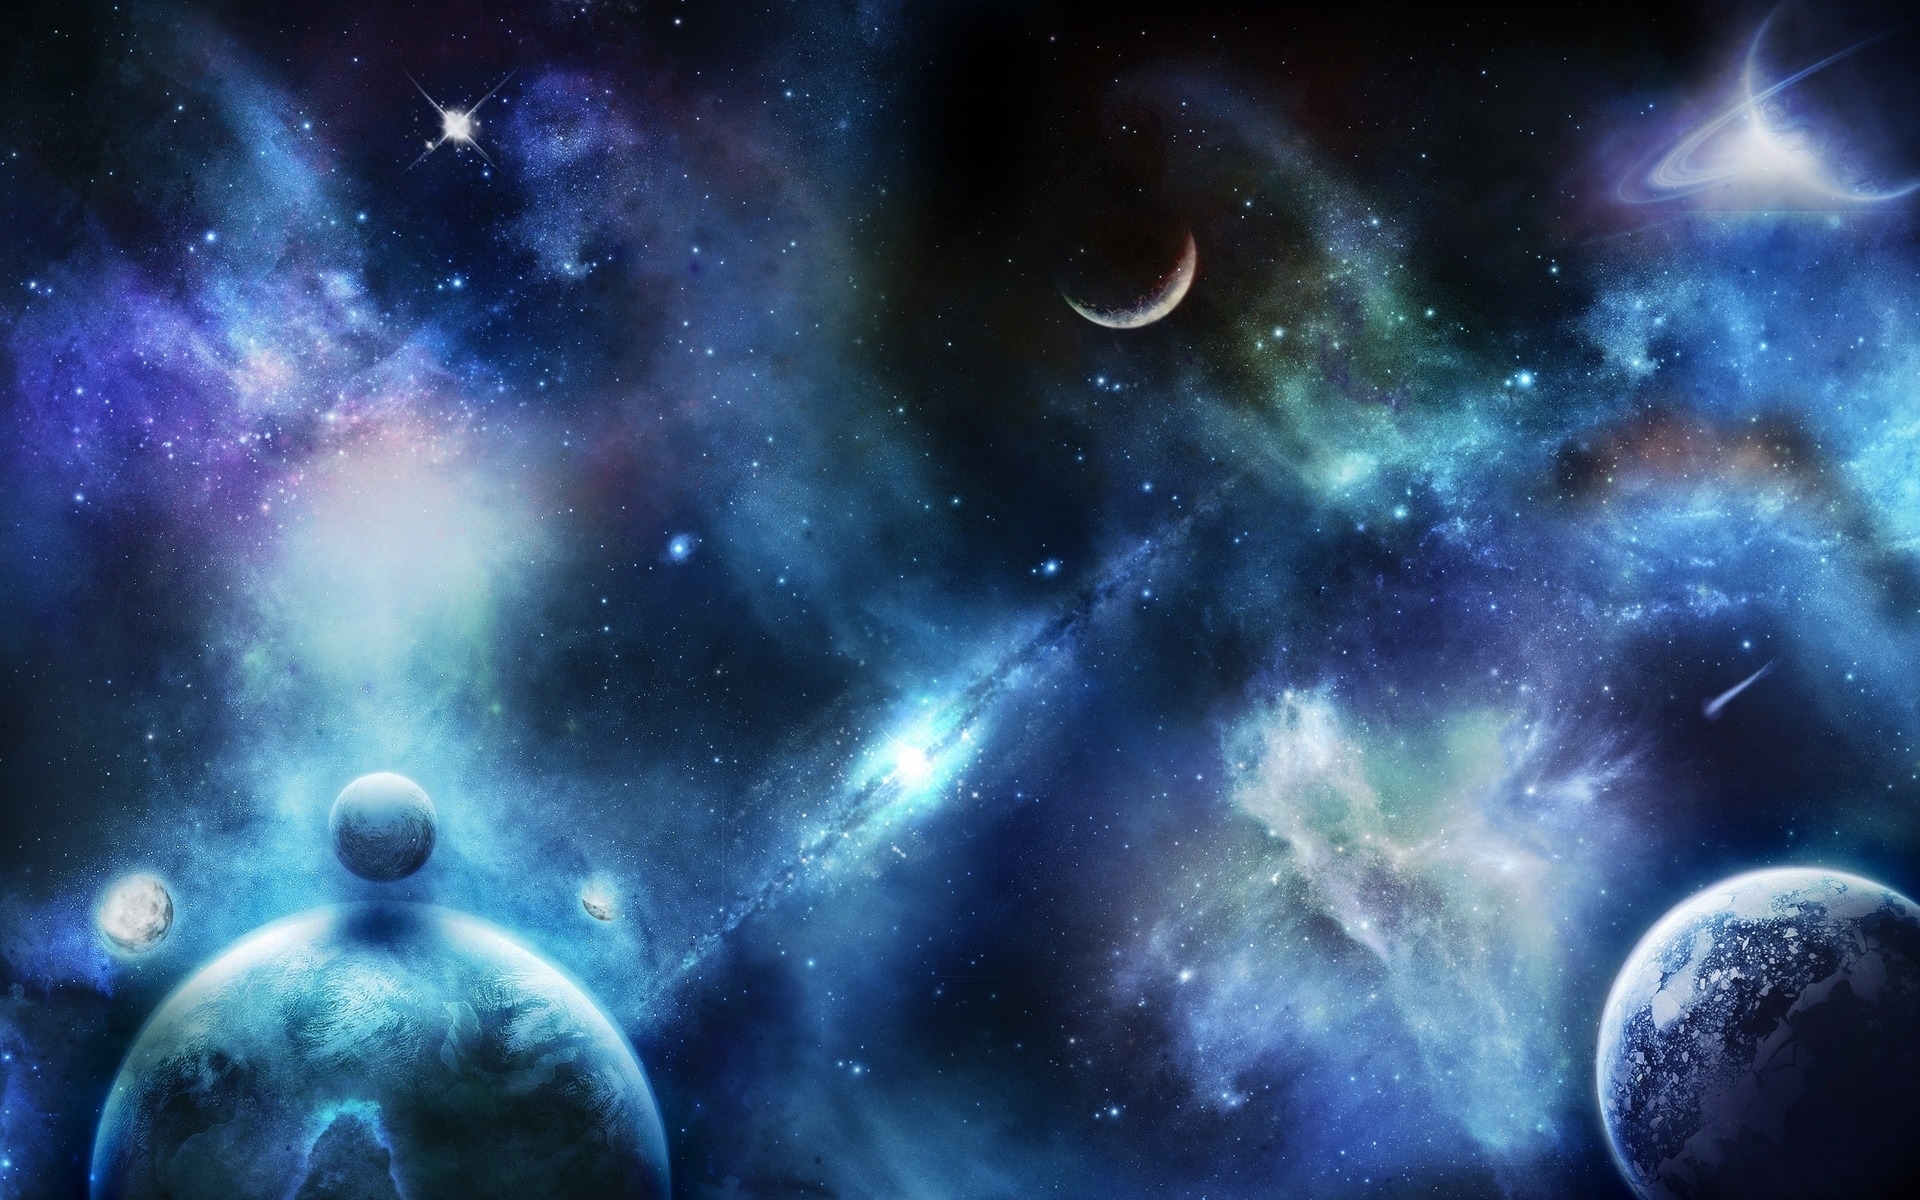 Spazio Art Wallpaper - Space Background With Planets - HD Wallpaper 